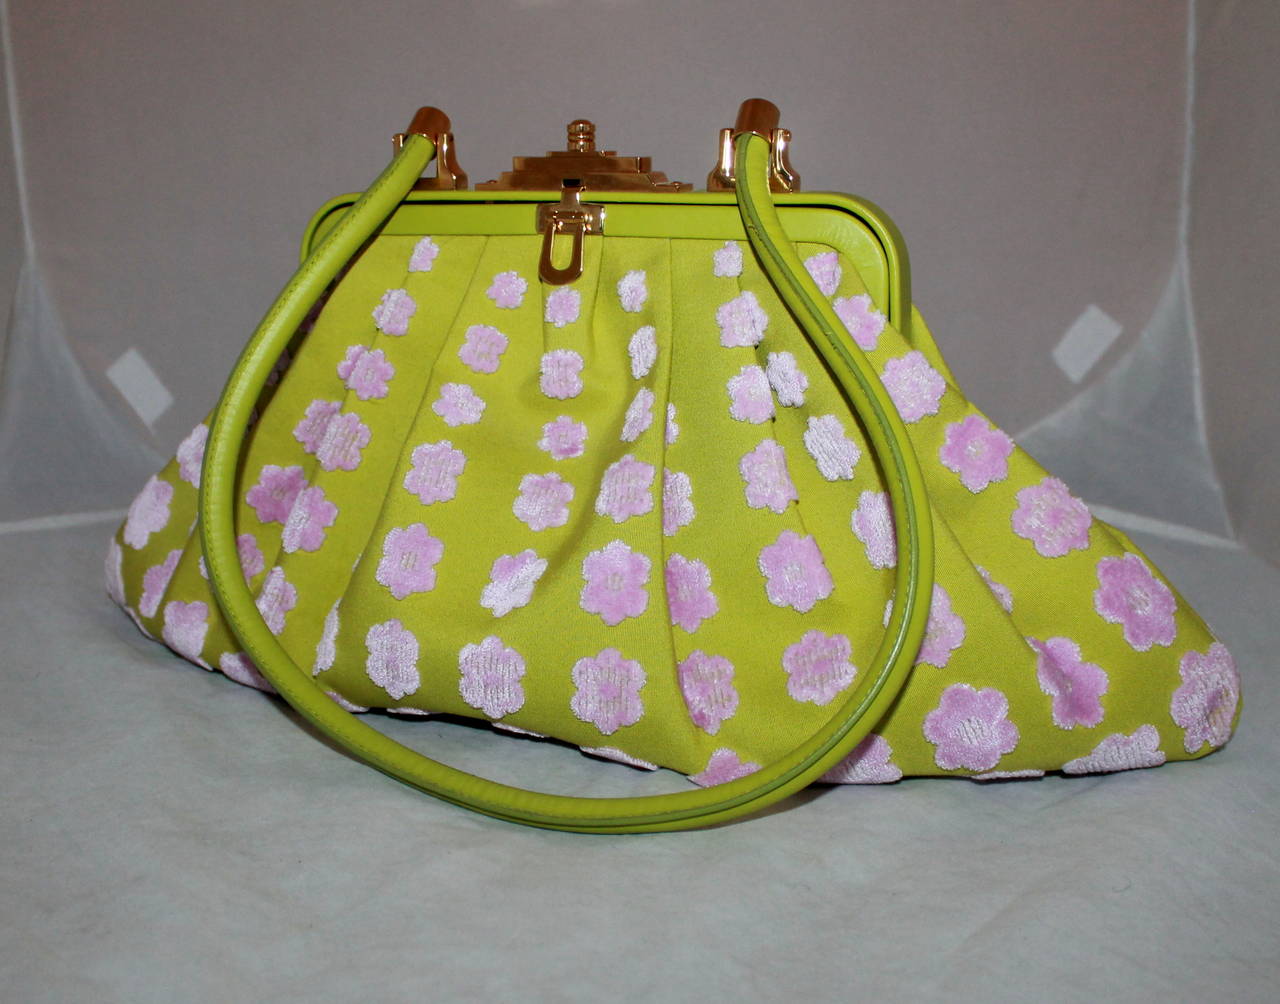 Roberta Di Camerino Lime & Pink Velvet Floral Shoulder Bag. This bag is in excellent condition with minimal use on the bottom. It is lined with leather has a push clasp.

Measurements:
Height- 10